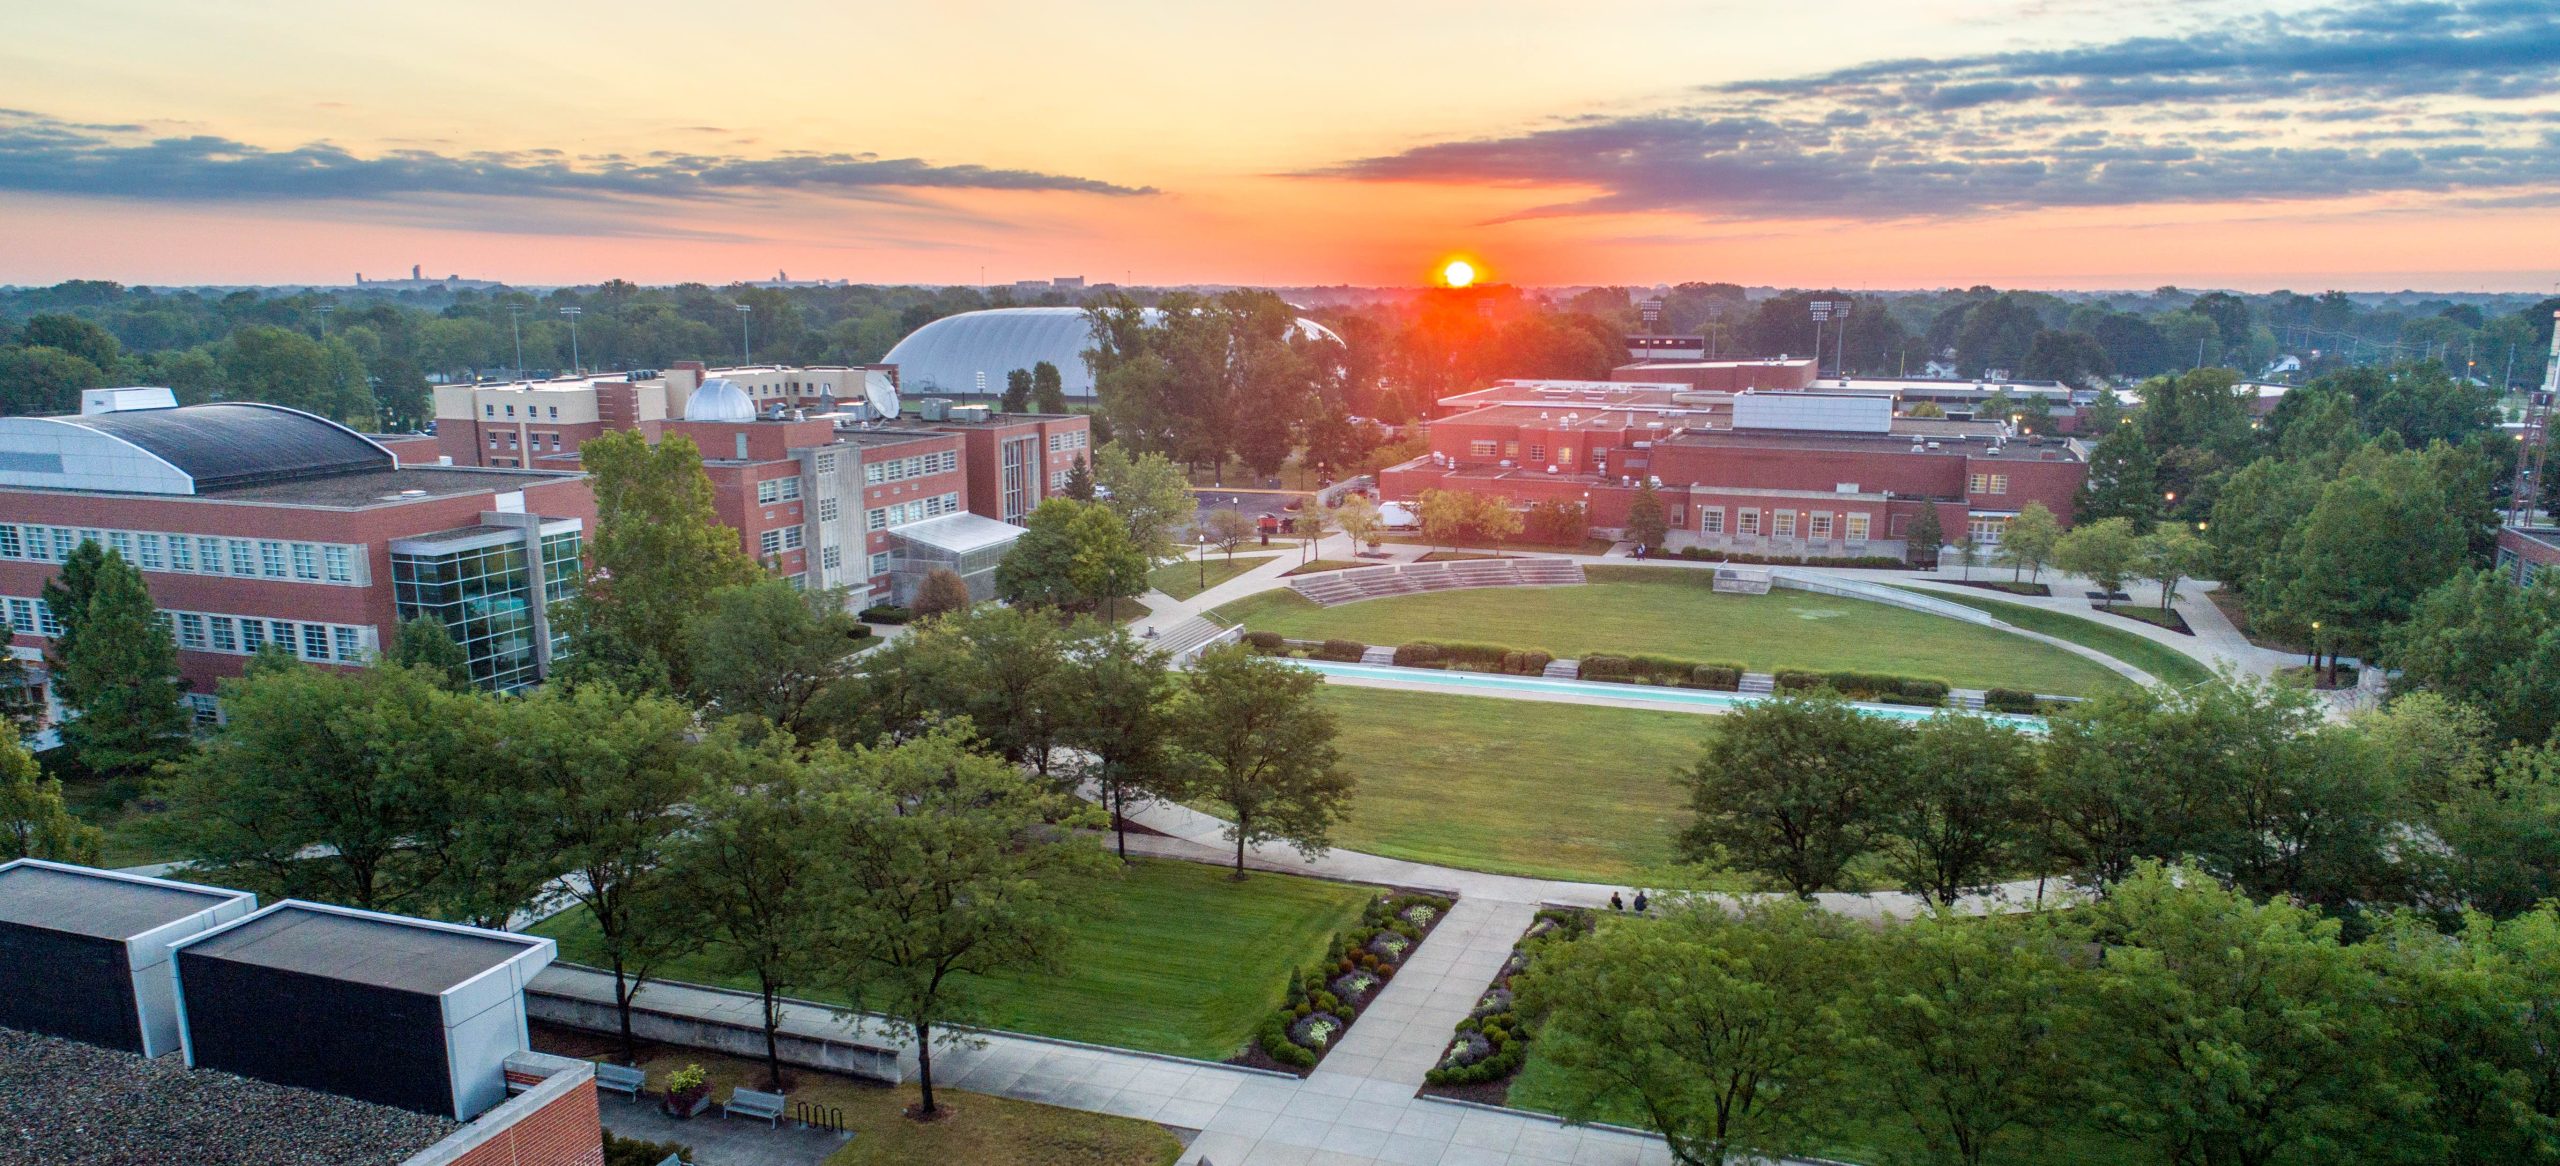 Aerial view of the University of Indianapolis at sunset.